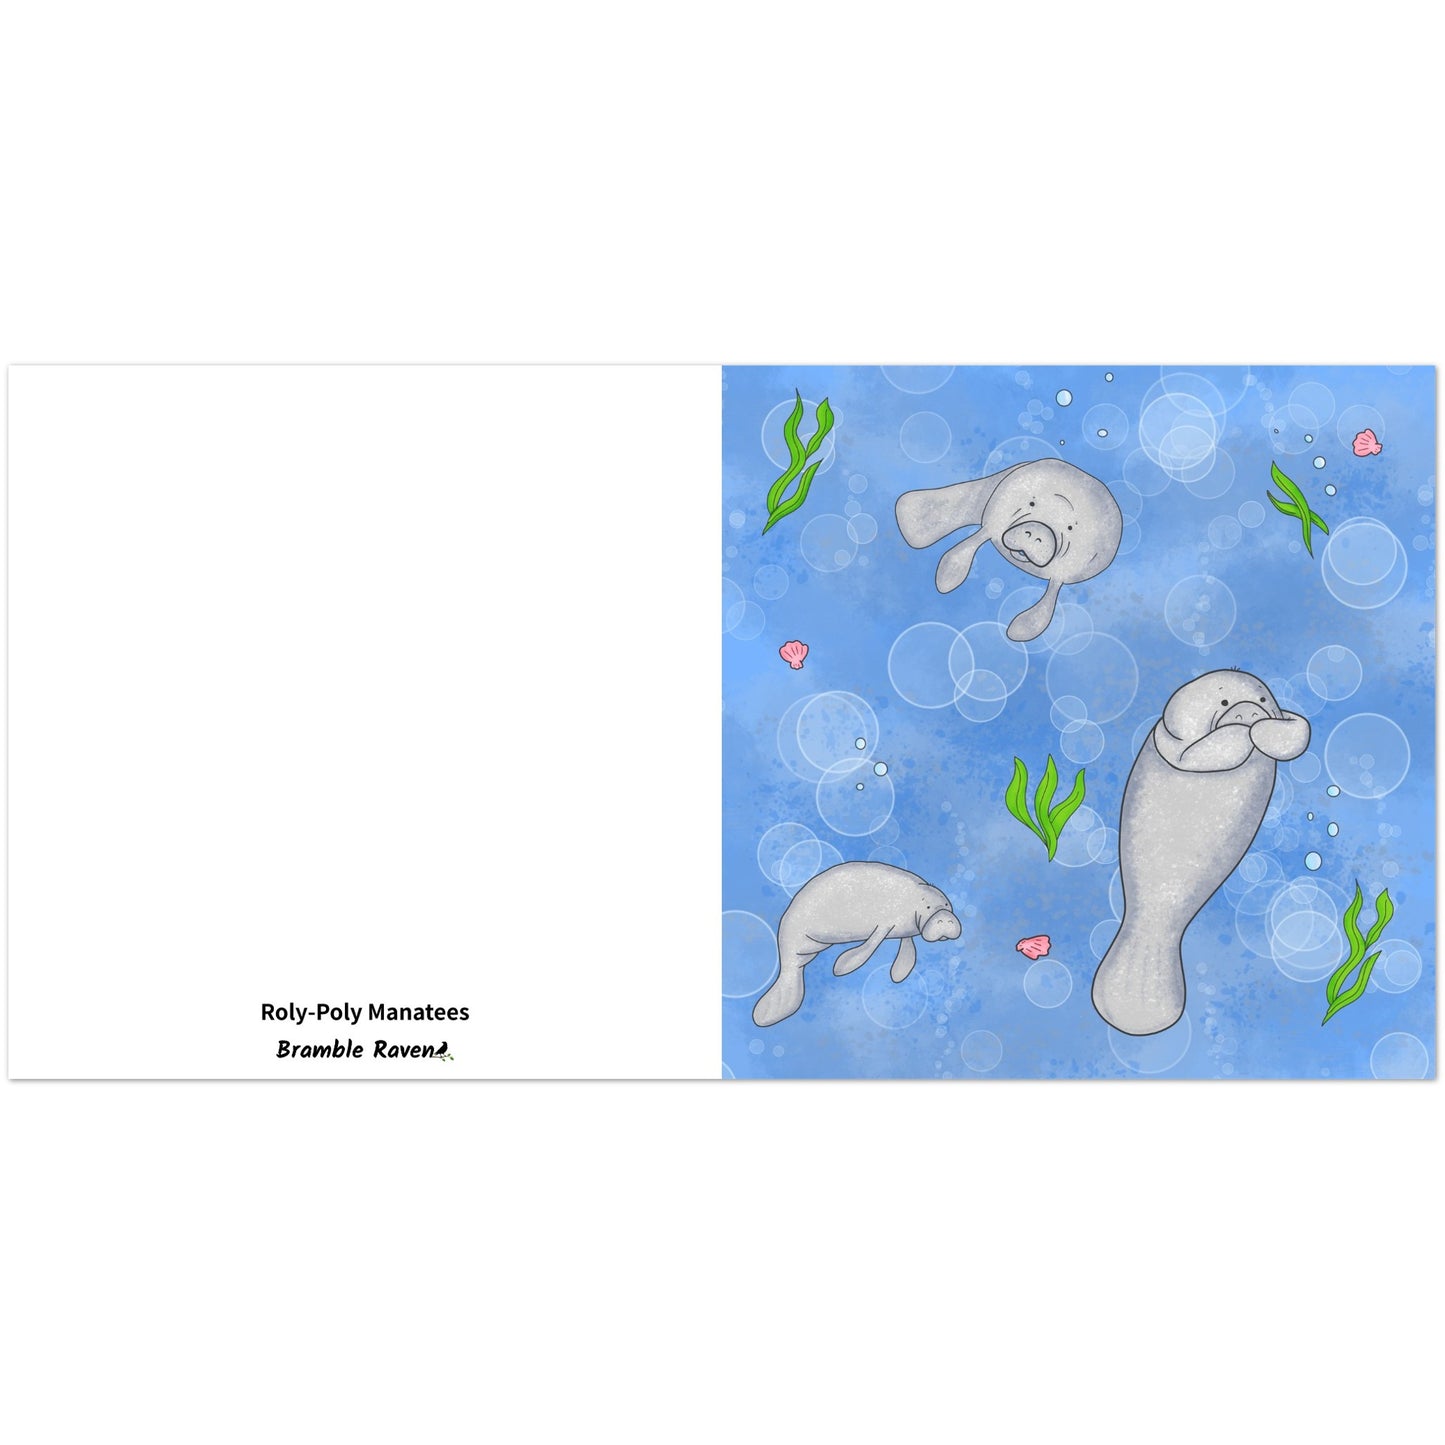 Pack of ten 5.25 x 5.25 inch greeting cards. Features illustrated roly-poly manatees on the front. Inside is blank. Made of coated paperboard. Comes with envelopes.